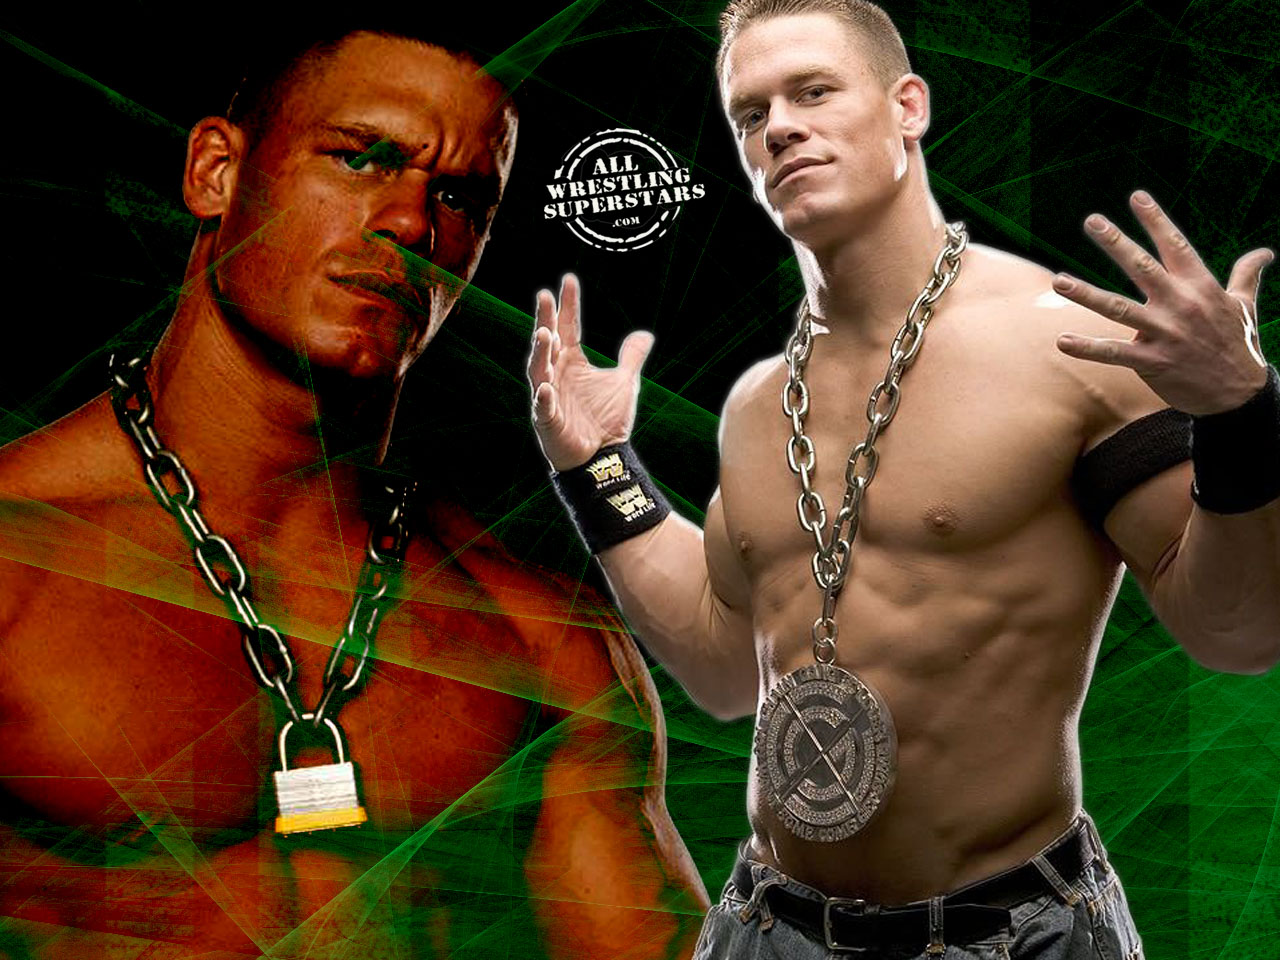 American Acplished Wrestler John Cena In A Great Pose With His